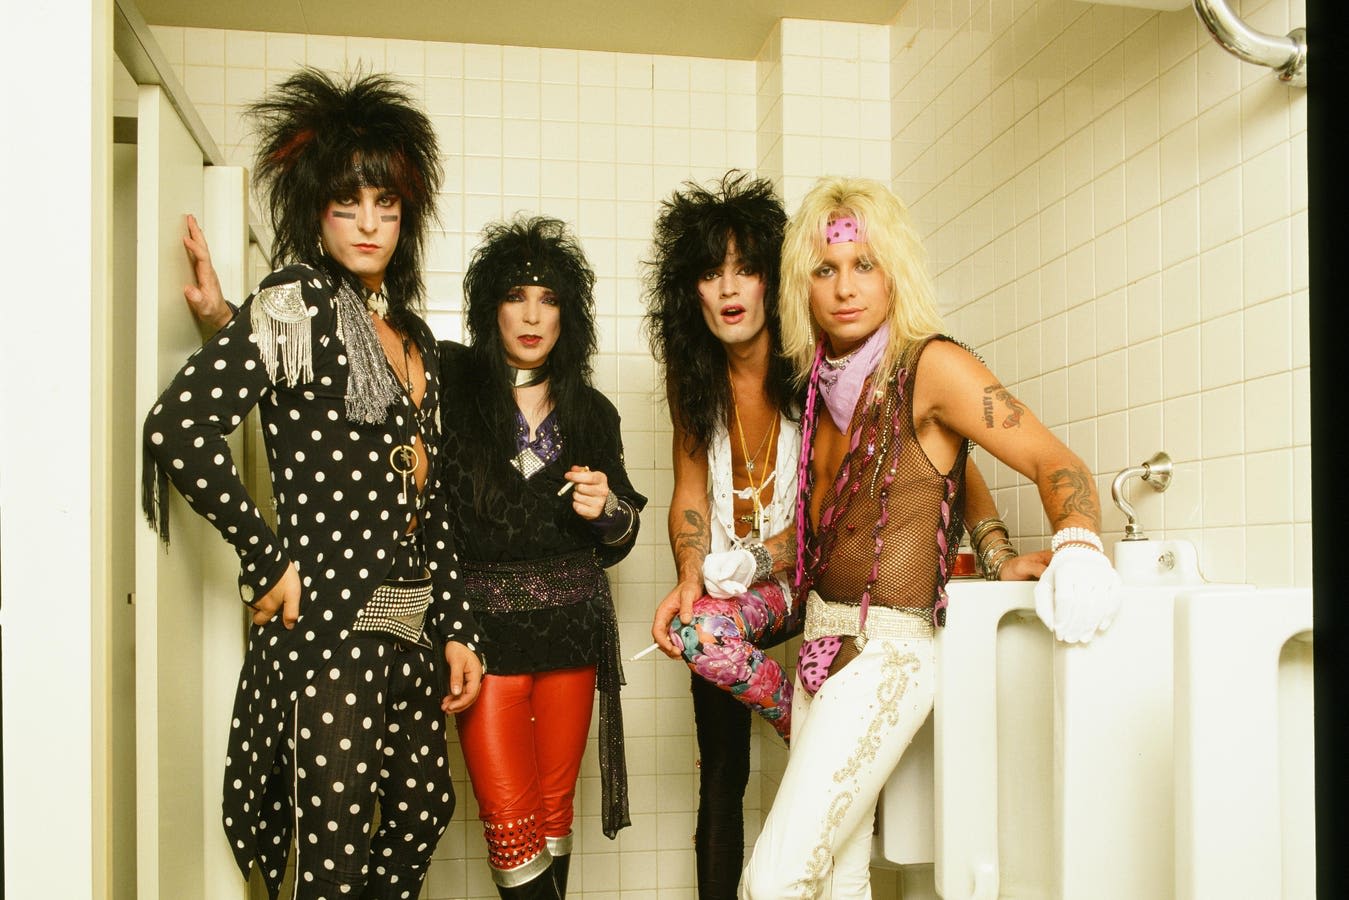 Mötley Crüe Blocked From Another No. 1 By Another Hard Rock Favorite